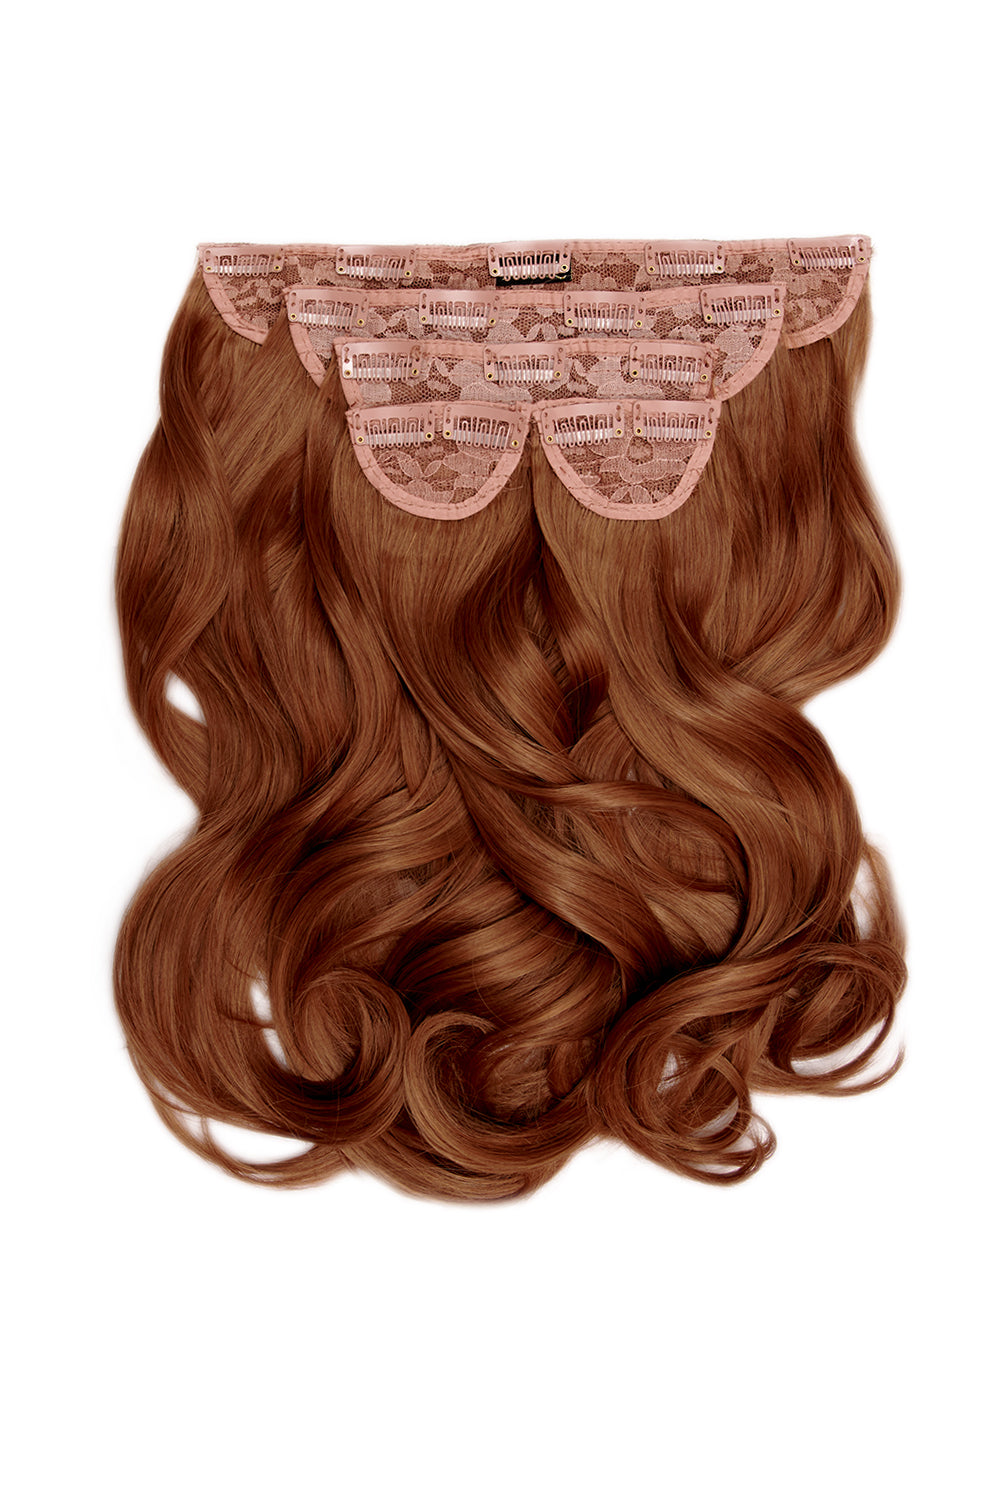 Super Thick 16" 5 Piece Blow Dry Wavy Clip In Hair Extensions - Copper Red